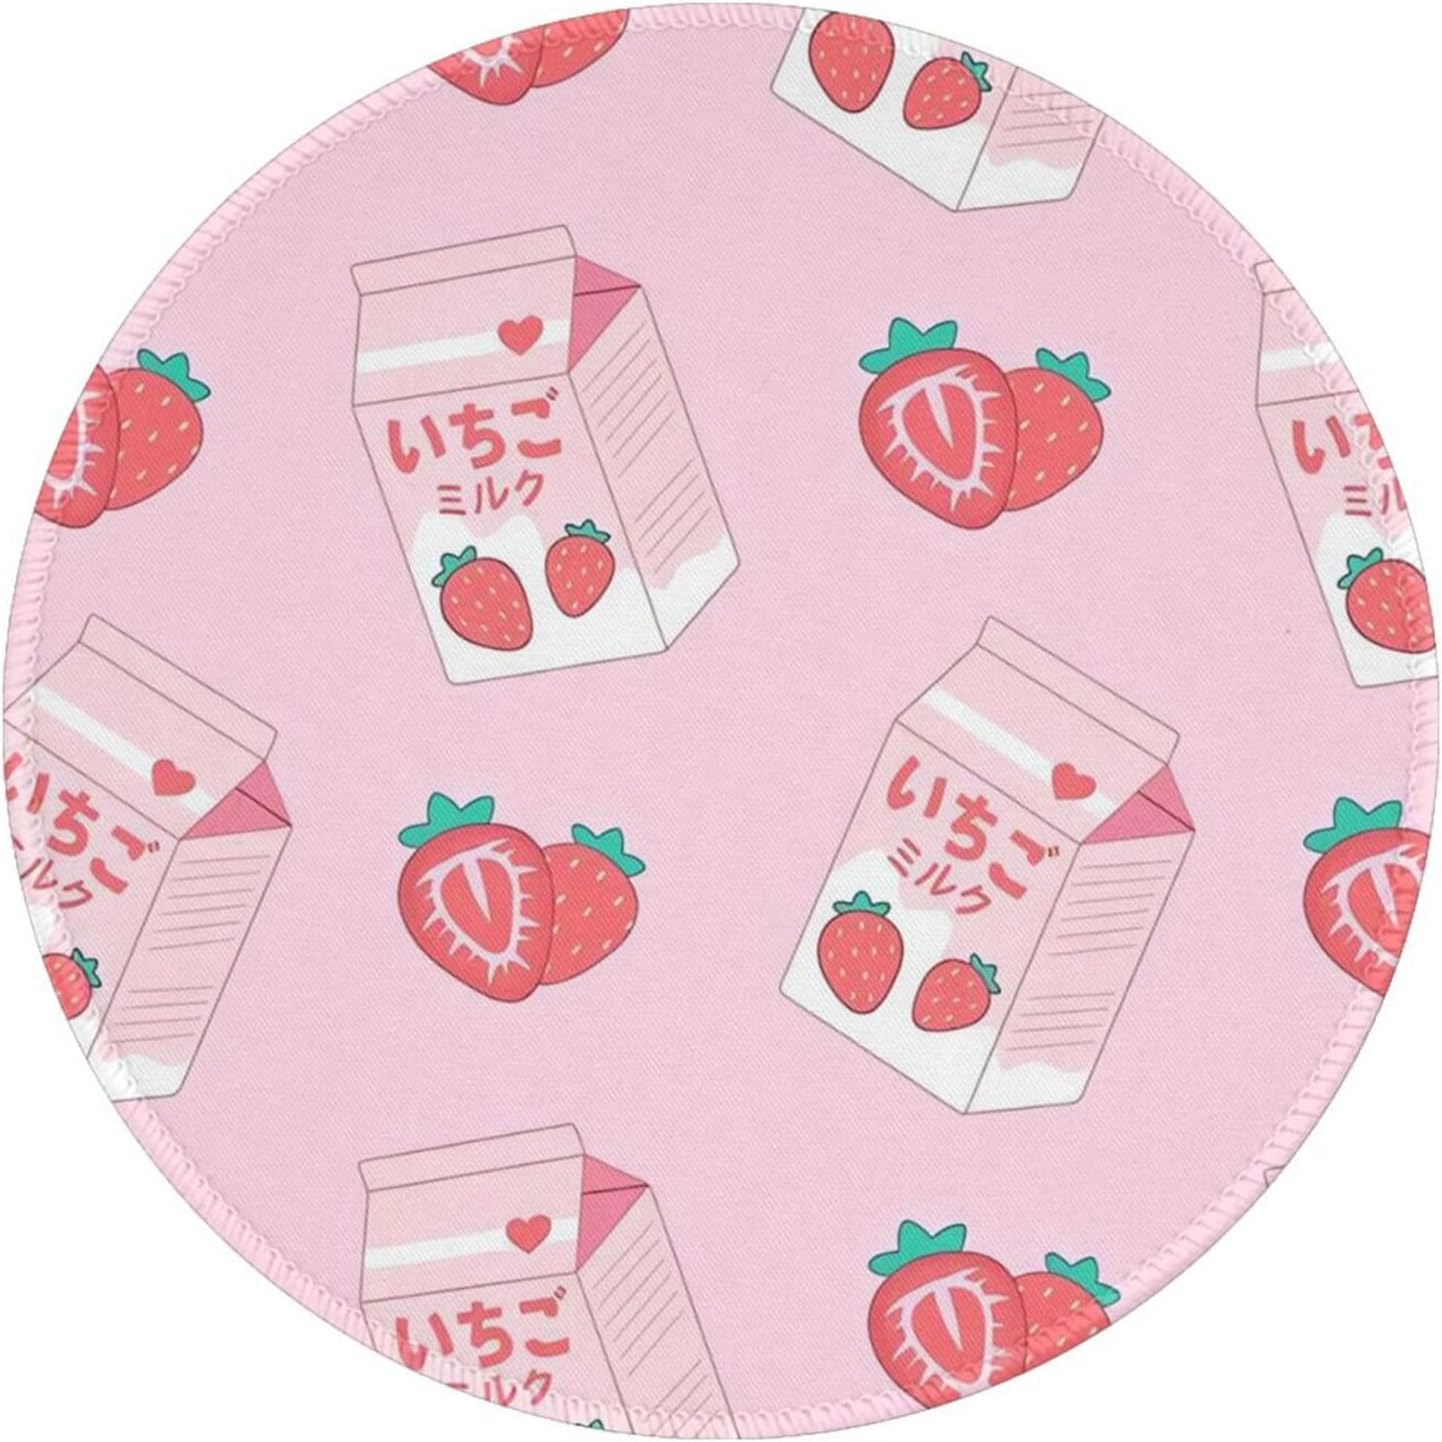 Cute round Mouse Pad Pink Strawberry Mousepad for Laptop Wireless Mouse Kawaii O